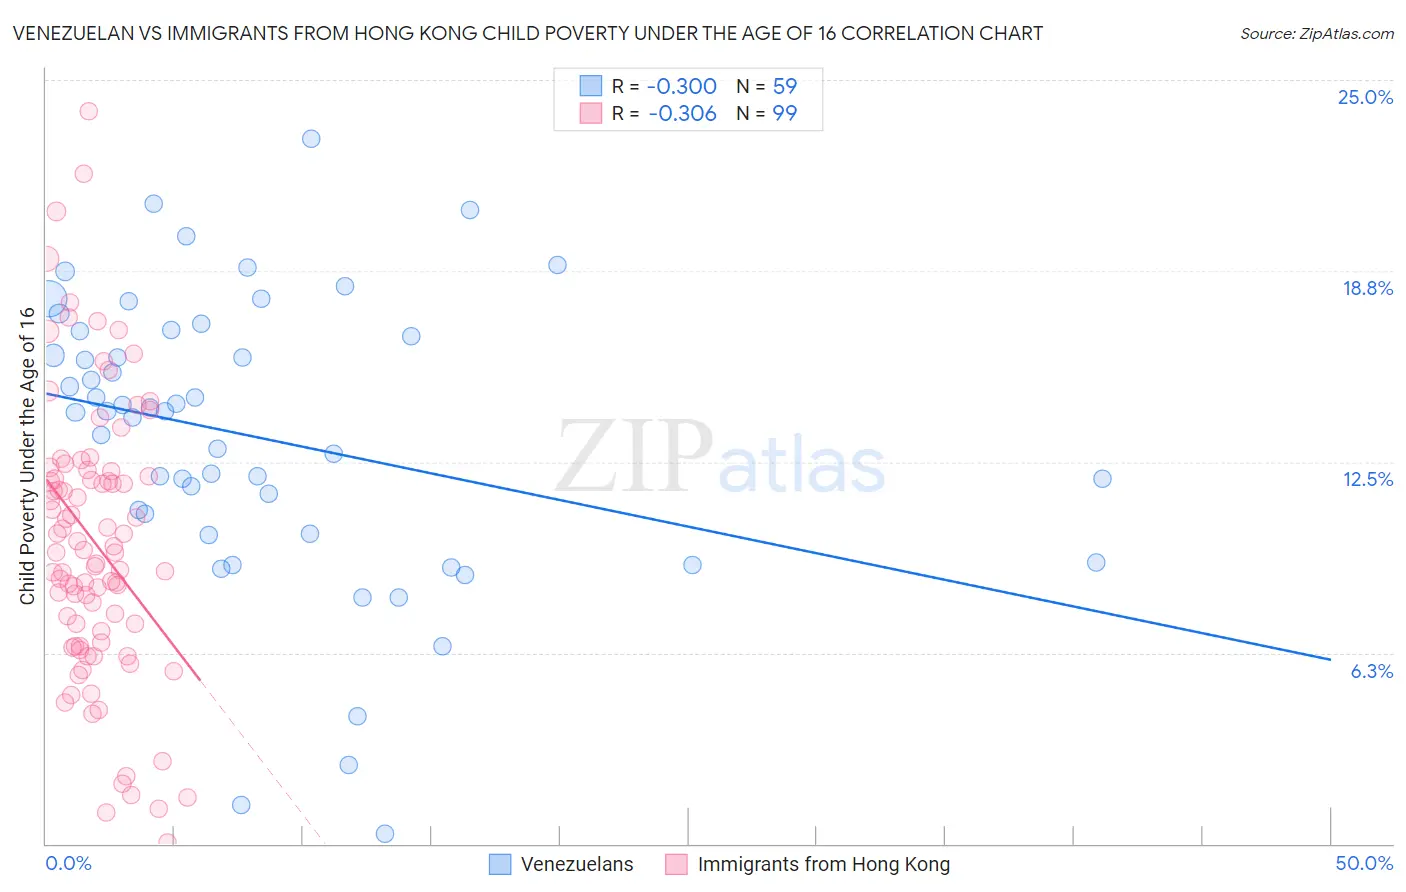 Venezuelan vs Immigrants from Hong Kong Child Poverty Under the Age of 16